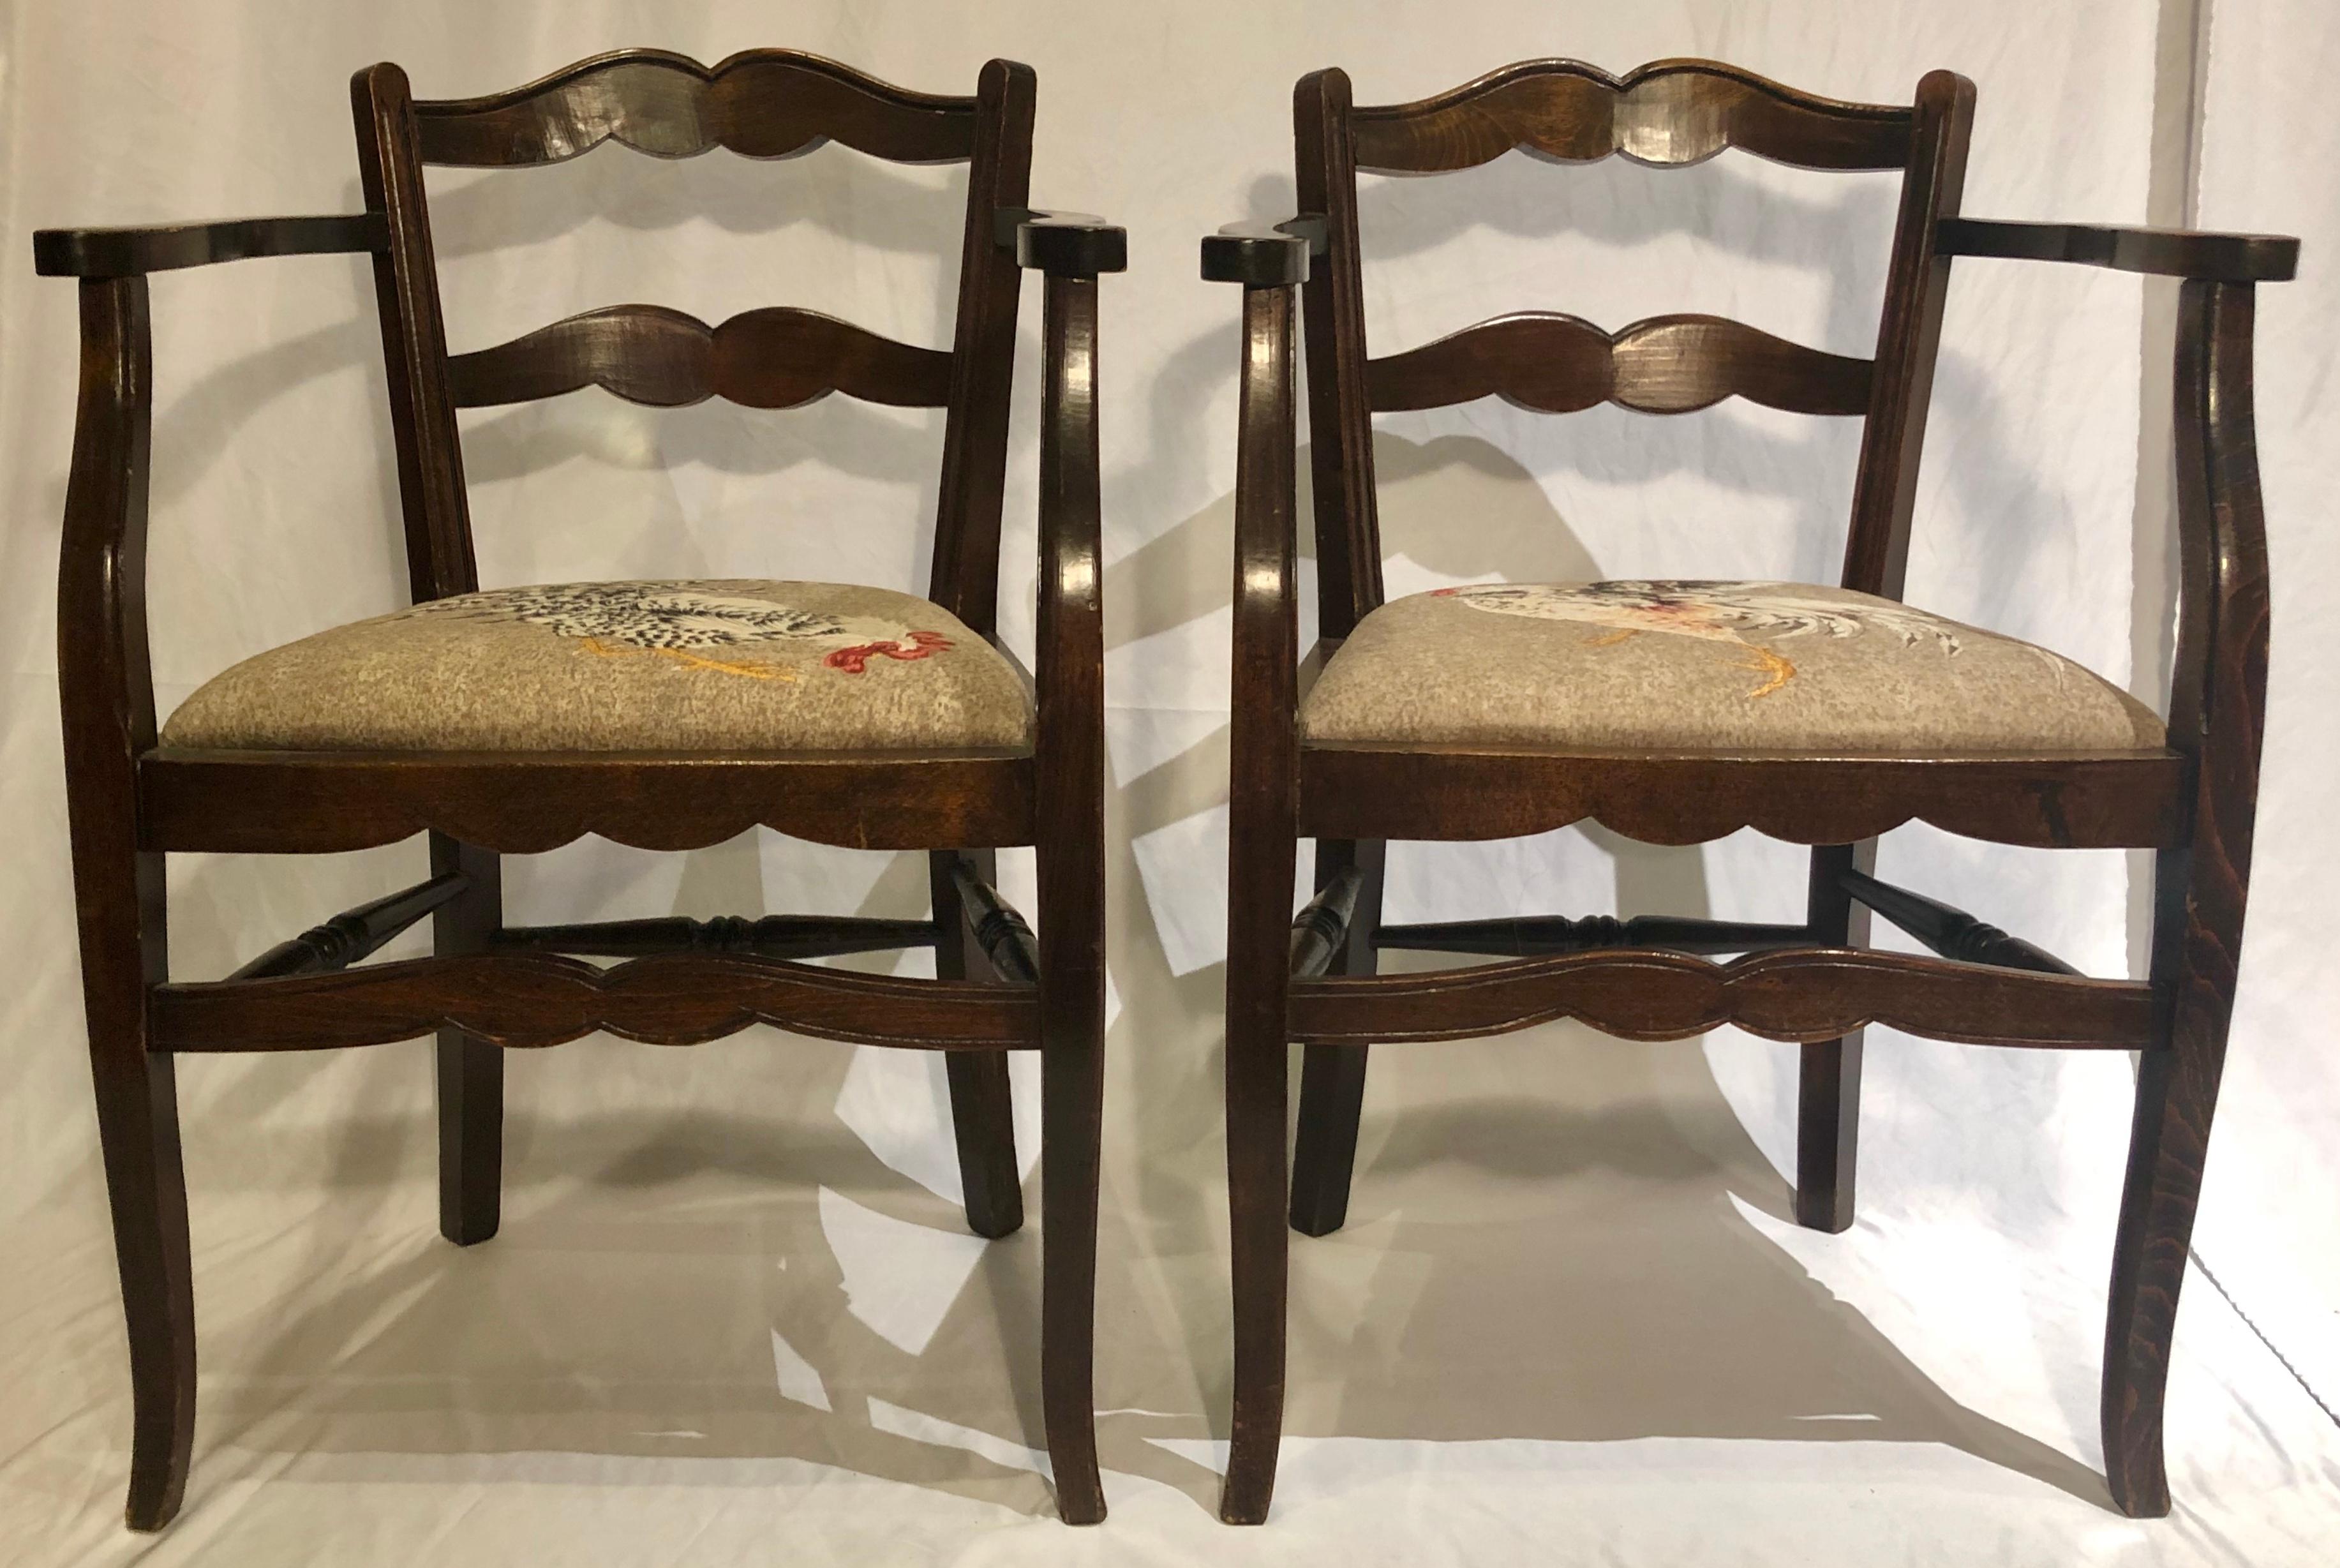 Pair antique 19th century French Country armchairs with rooster themed upholstery, Circa 1890.